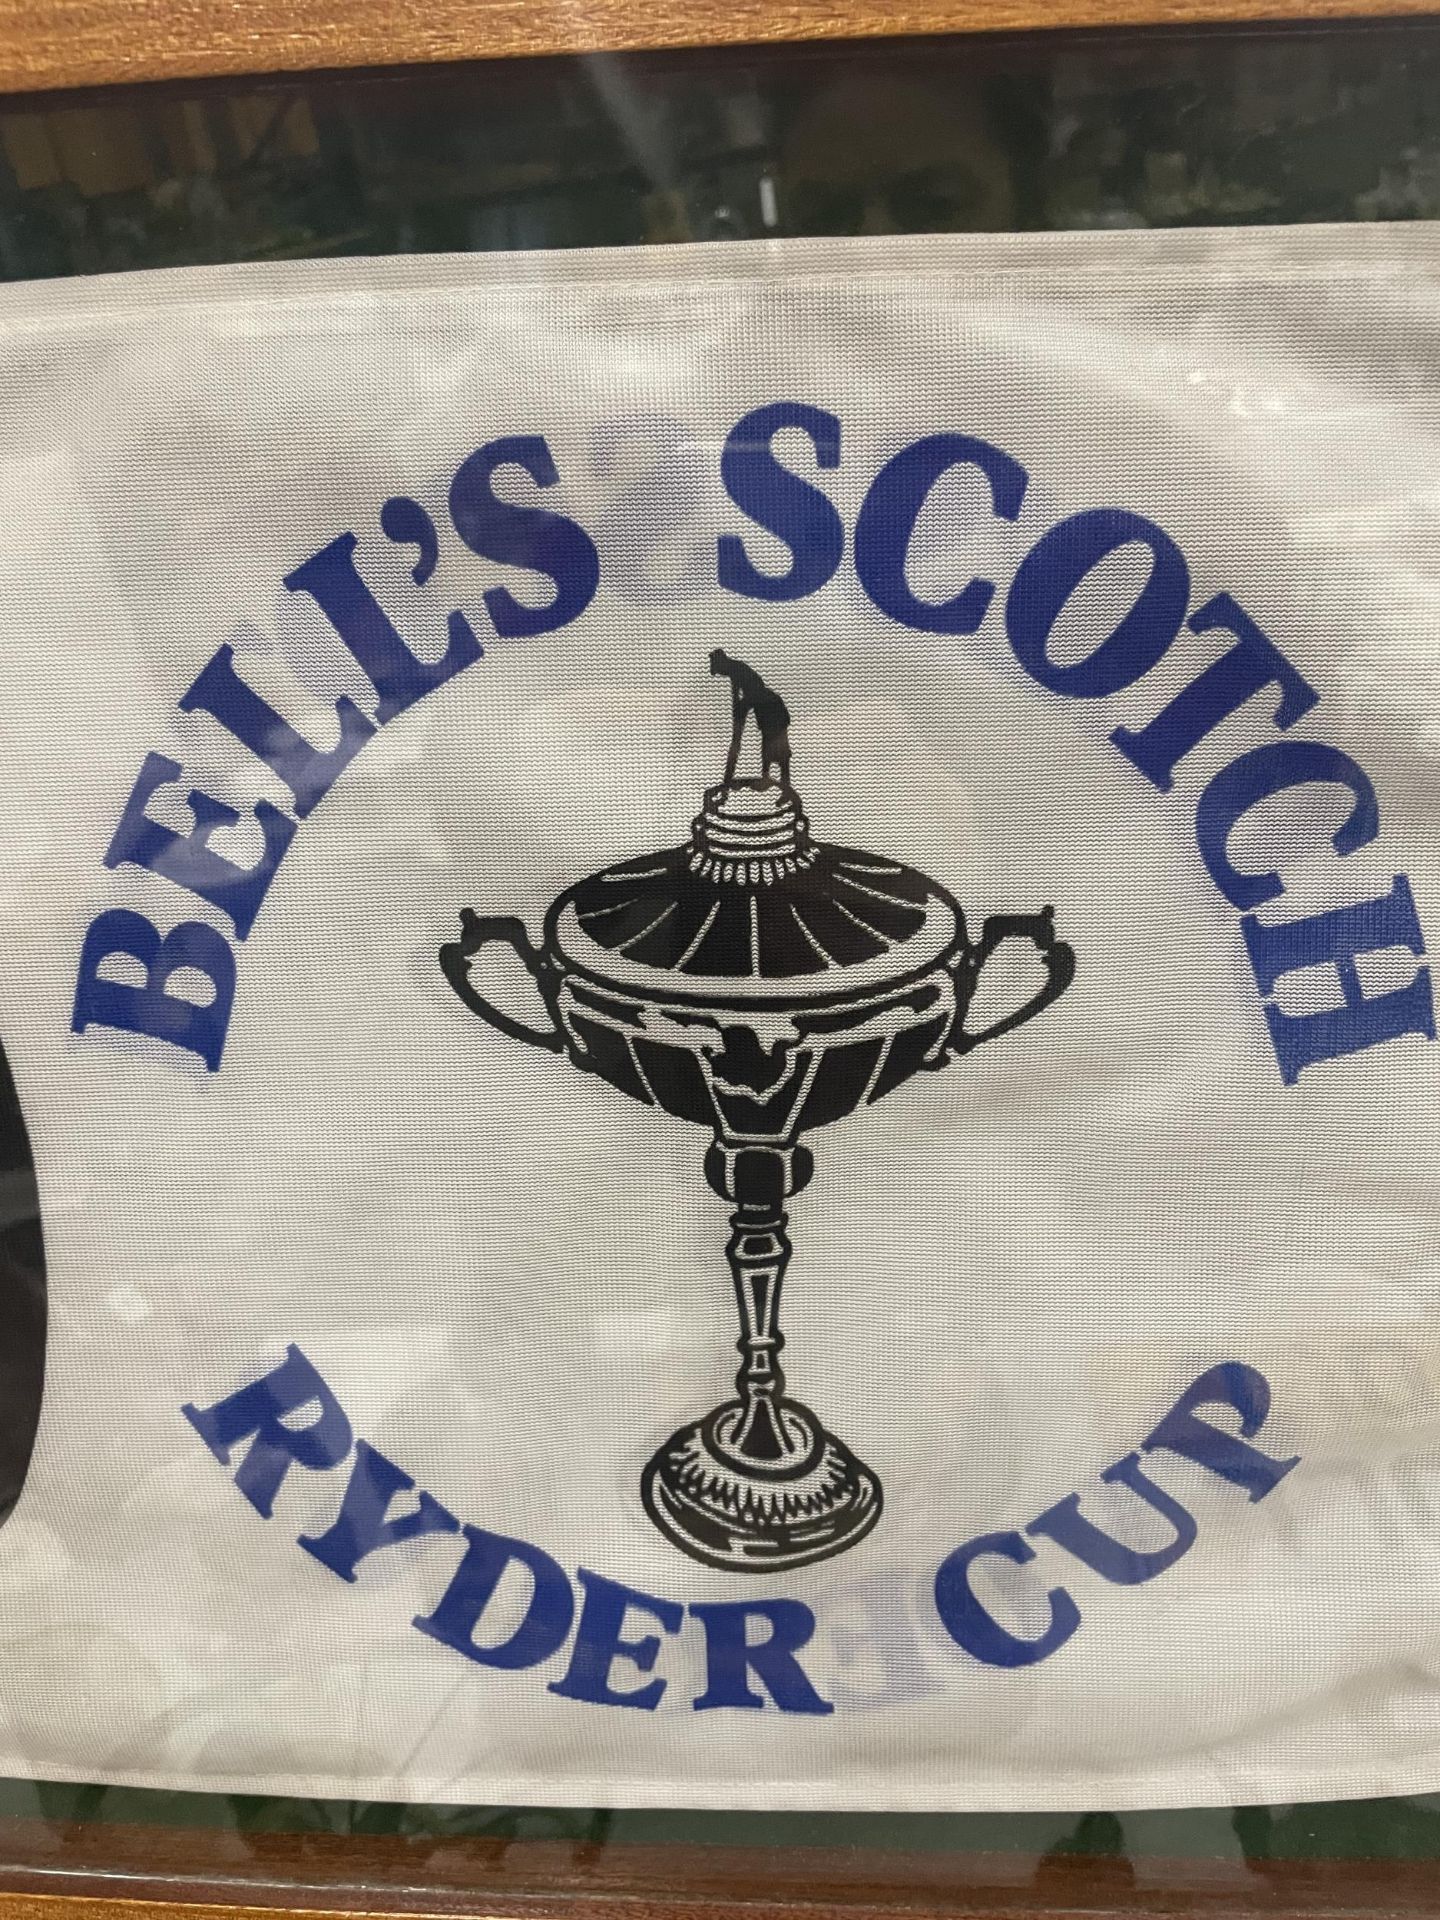 A FRAMED BELL'S SCOTCH RYDER CUP FLAG - HOLE 10 - Image 2 of 3